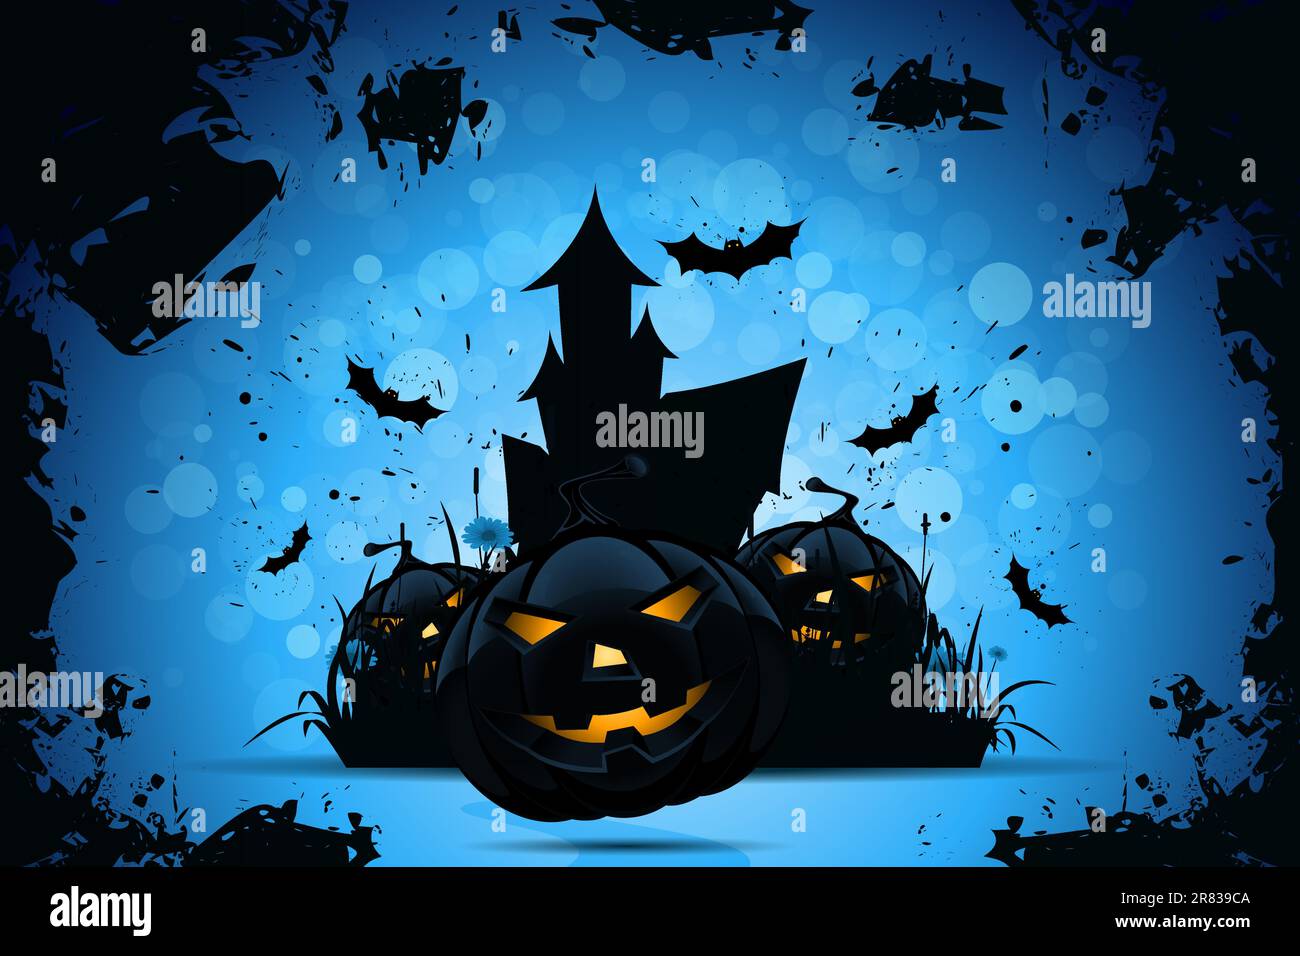 Grunge Halloween Party Background with Pampkins, House in Grass and Bats Stock Vector